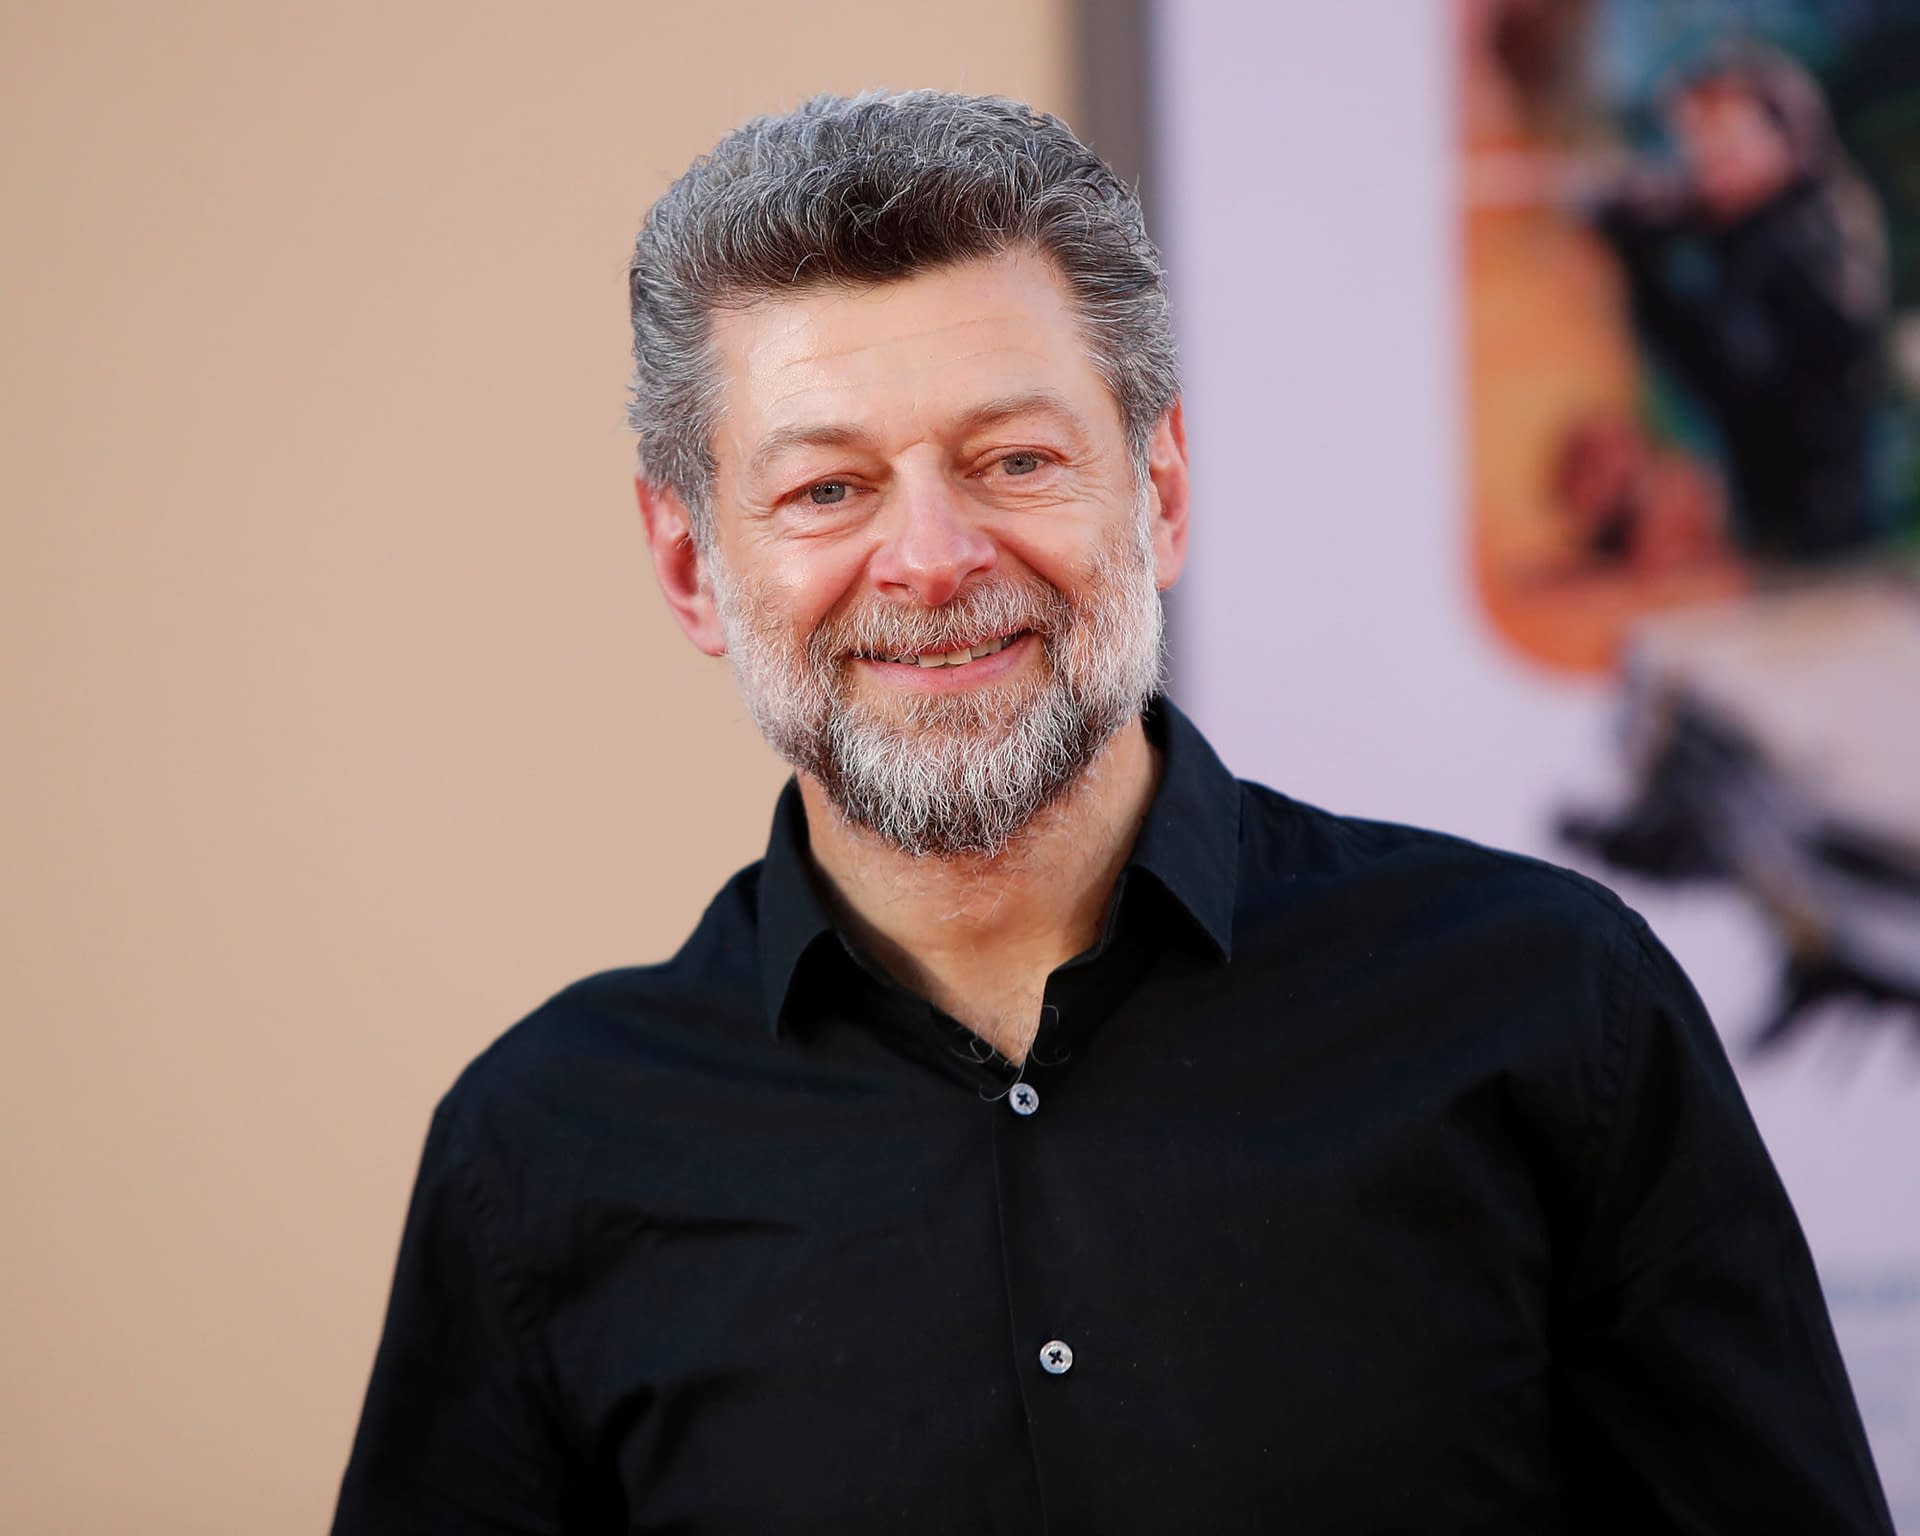 Andy Serkis Officially Signs on to Direct "Venom 2"